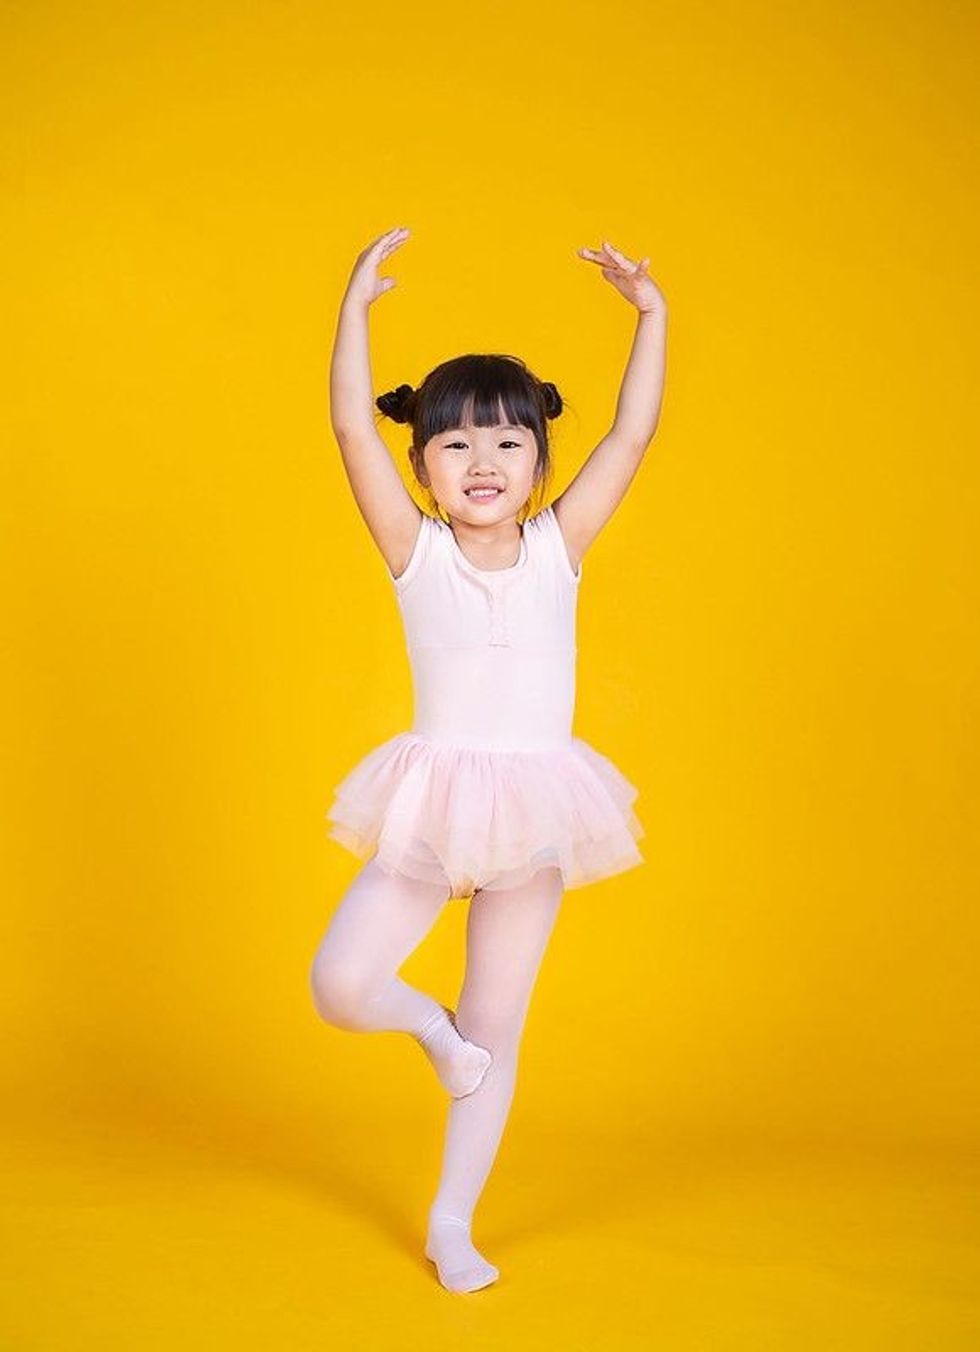 Asian ethnic baby girl dressed as a ballet dancer on yellow background.